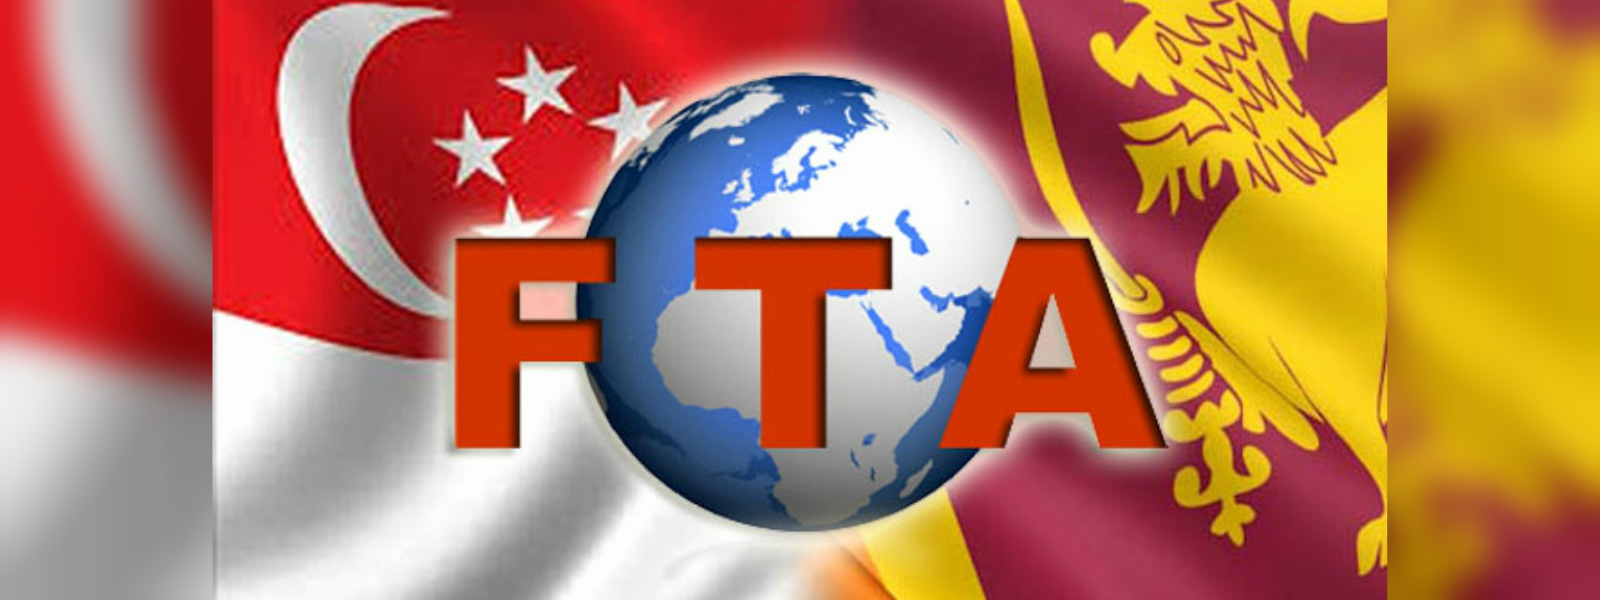 Committee to study and report on SL- Singapore FTA